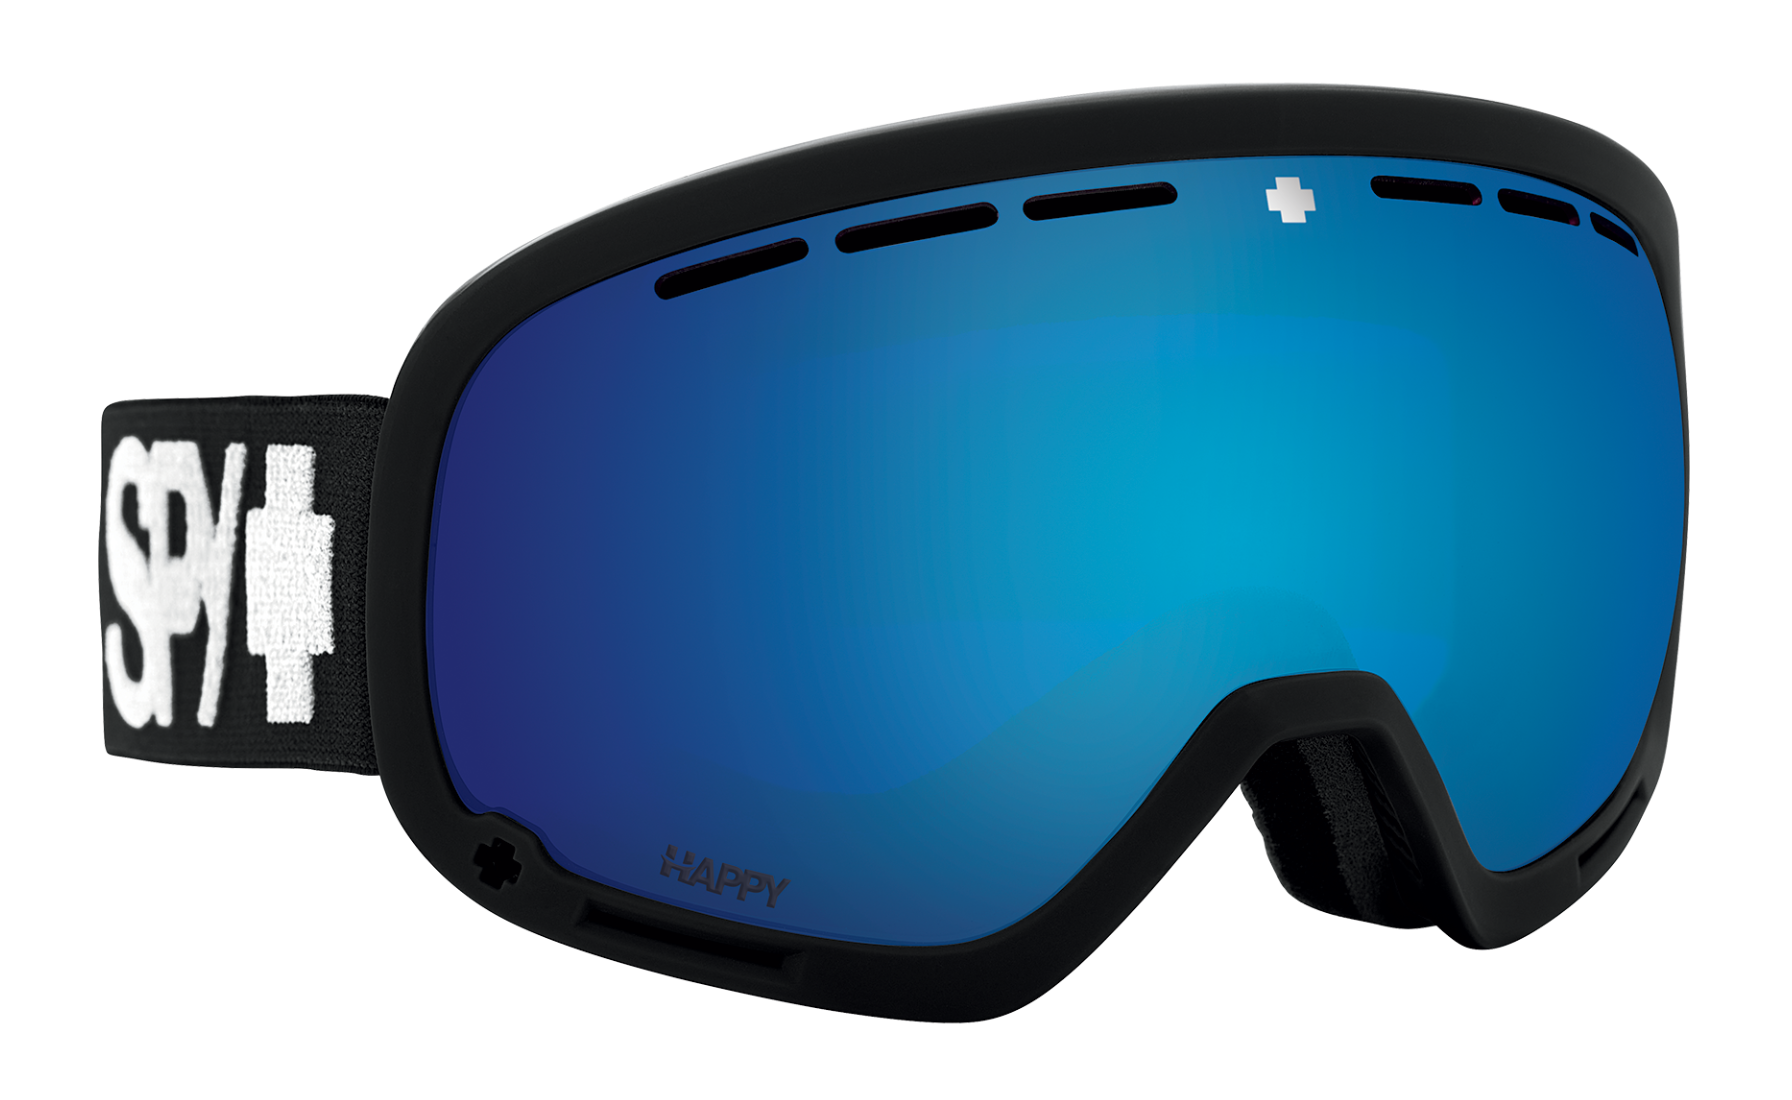 SPY Marshall snow goggles in matte black with dark blue mirror Happy lens.